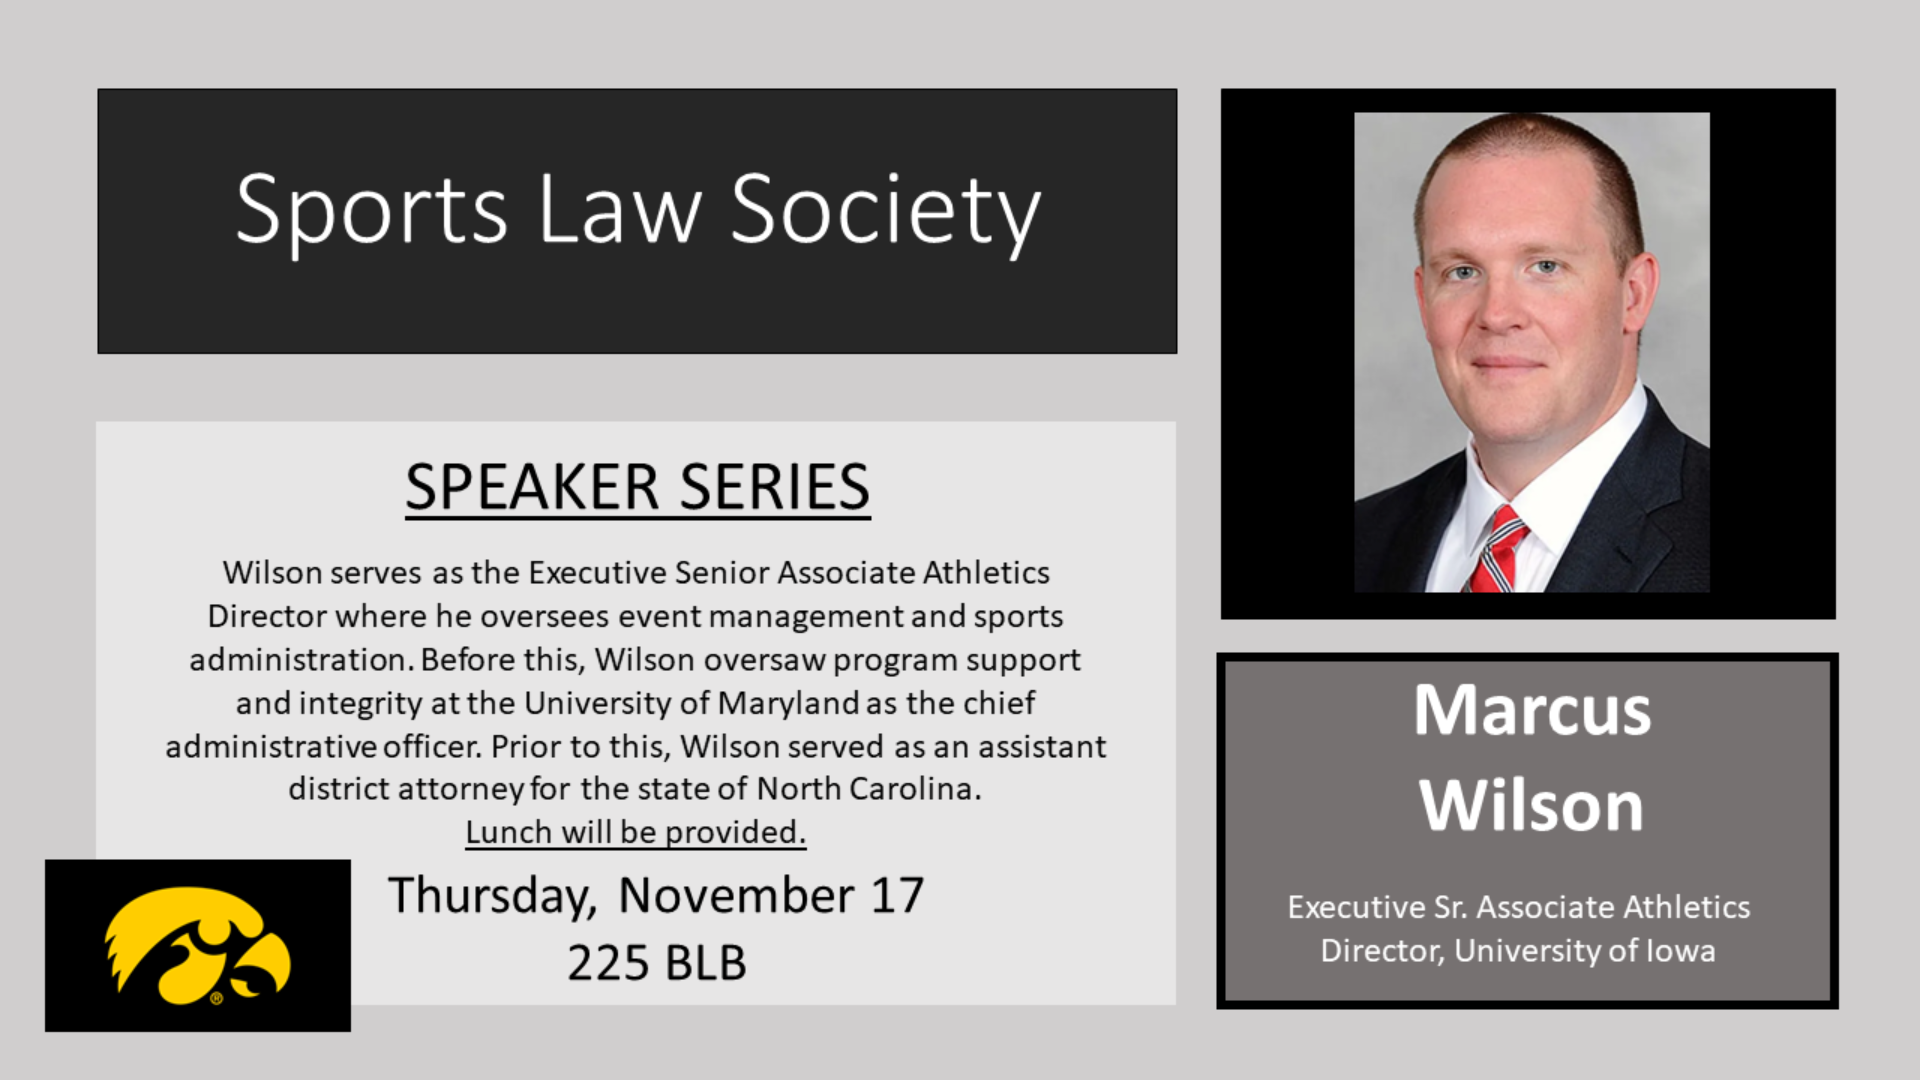 Sports Law Society speaker series.    Marcus Wilson, Executive Sr. Associate Athletics Director, University of Iowa    Thursday, November 17, 225 BLB    Wilson serves as the Executive Senior Associate Athletics Director where he oversees event management and sports administration. Before this, Wilson oversaw program support and integrity at the University of Maryland as the chief administrative officer. Prior to this, Wilson served as an assistant district attorney for the state of North Carolina.    Lunch will be provided.